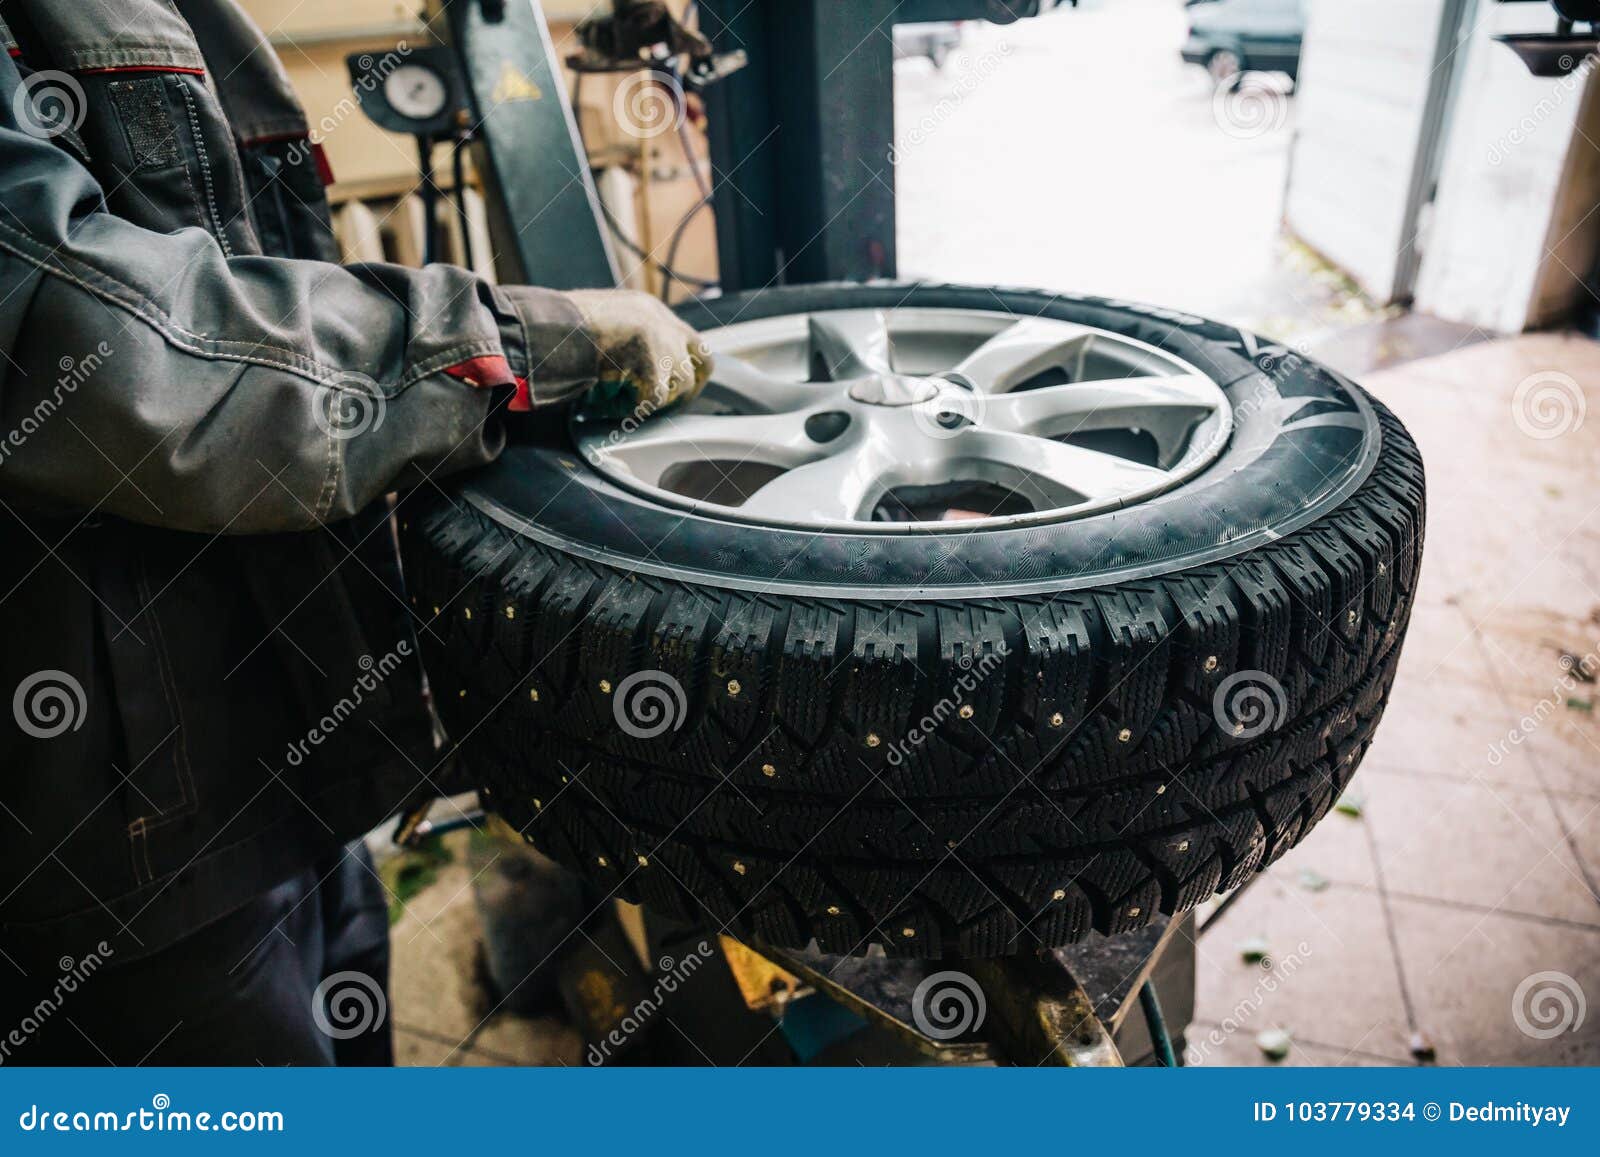 car mechanic worker doing tire replacement and wheel balancing with special equipment in repair service station